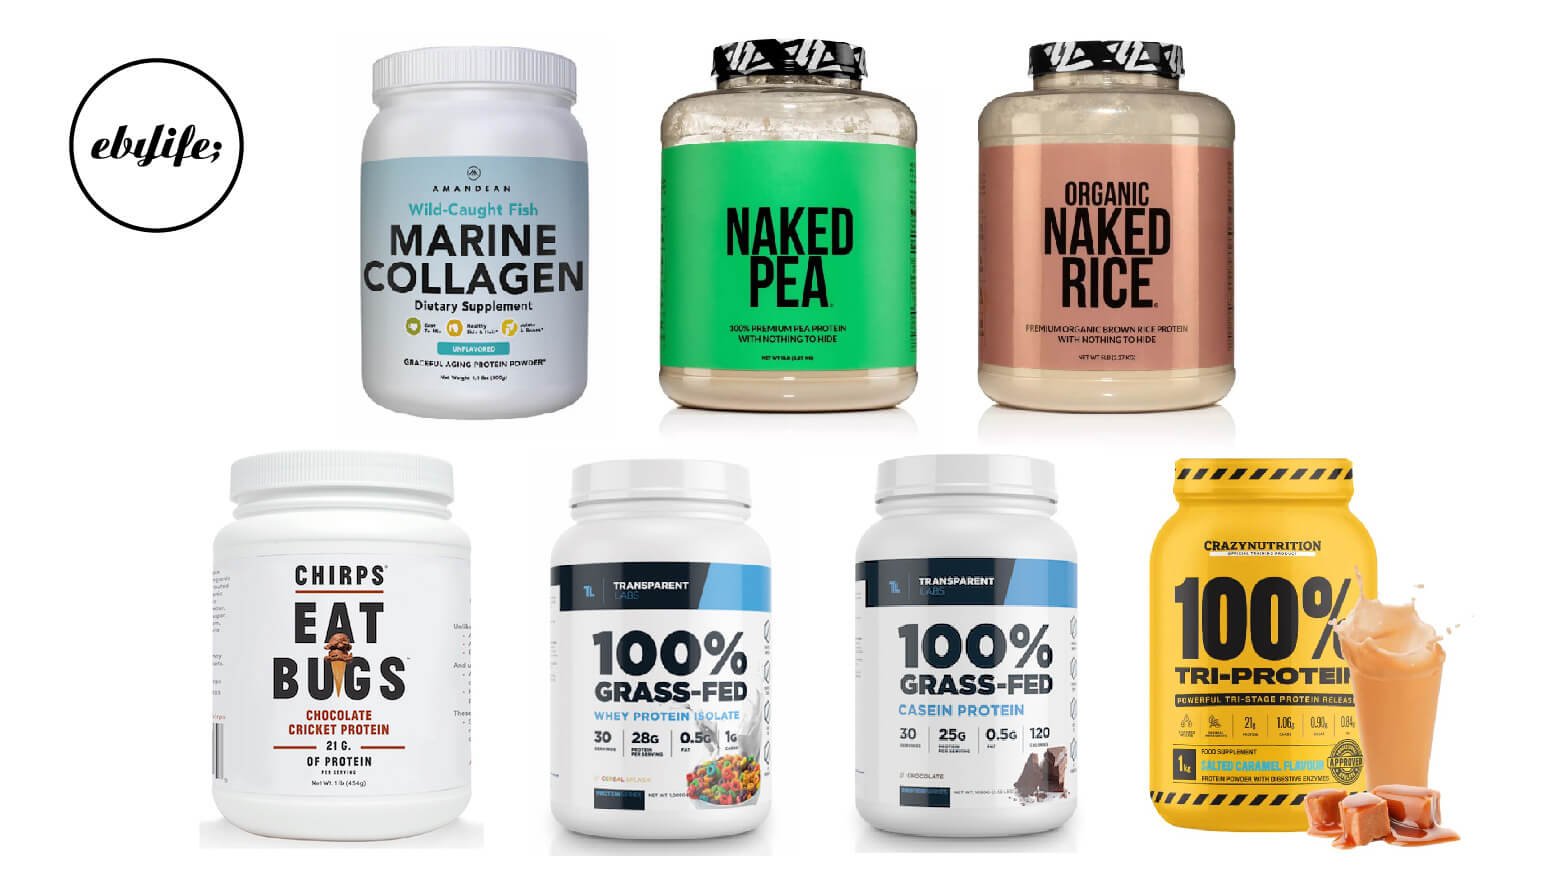 7 Most Effective Protein Powders For Weight Loss & Muscle Gain